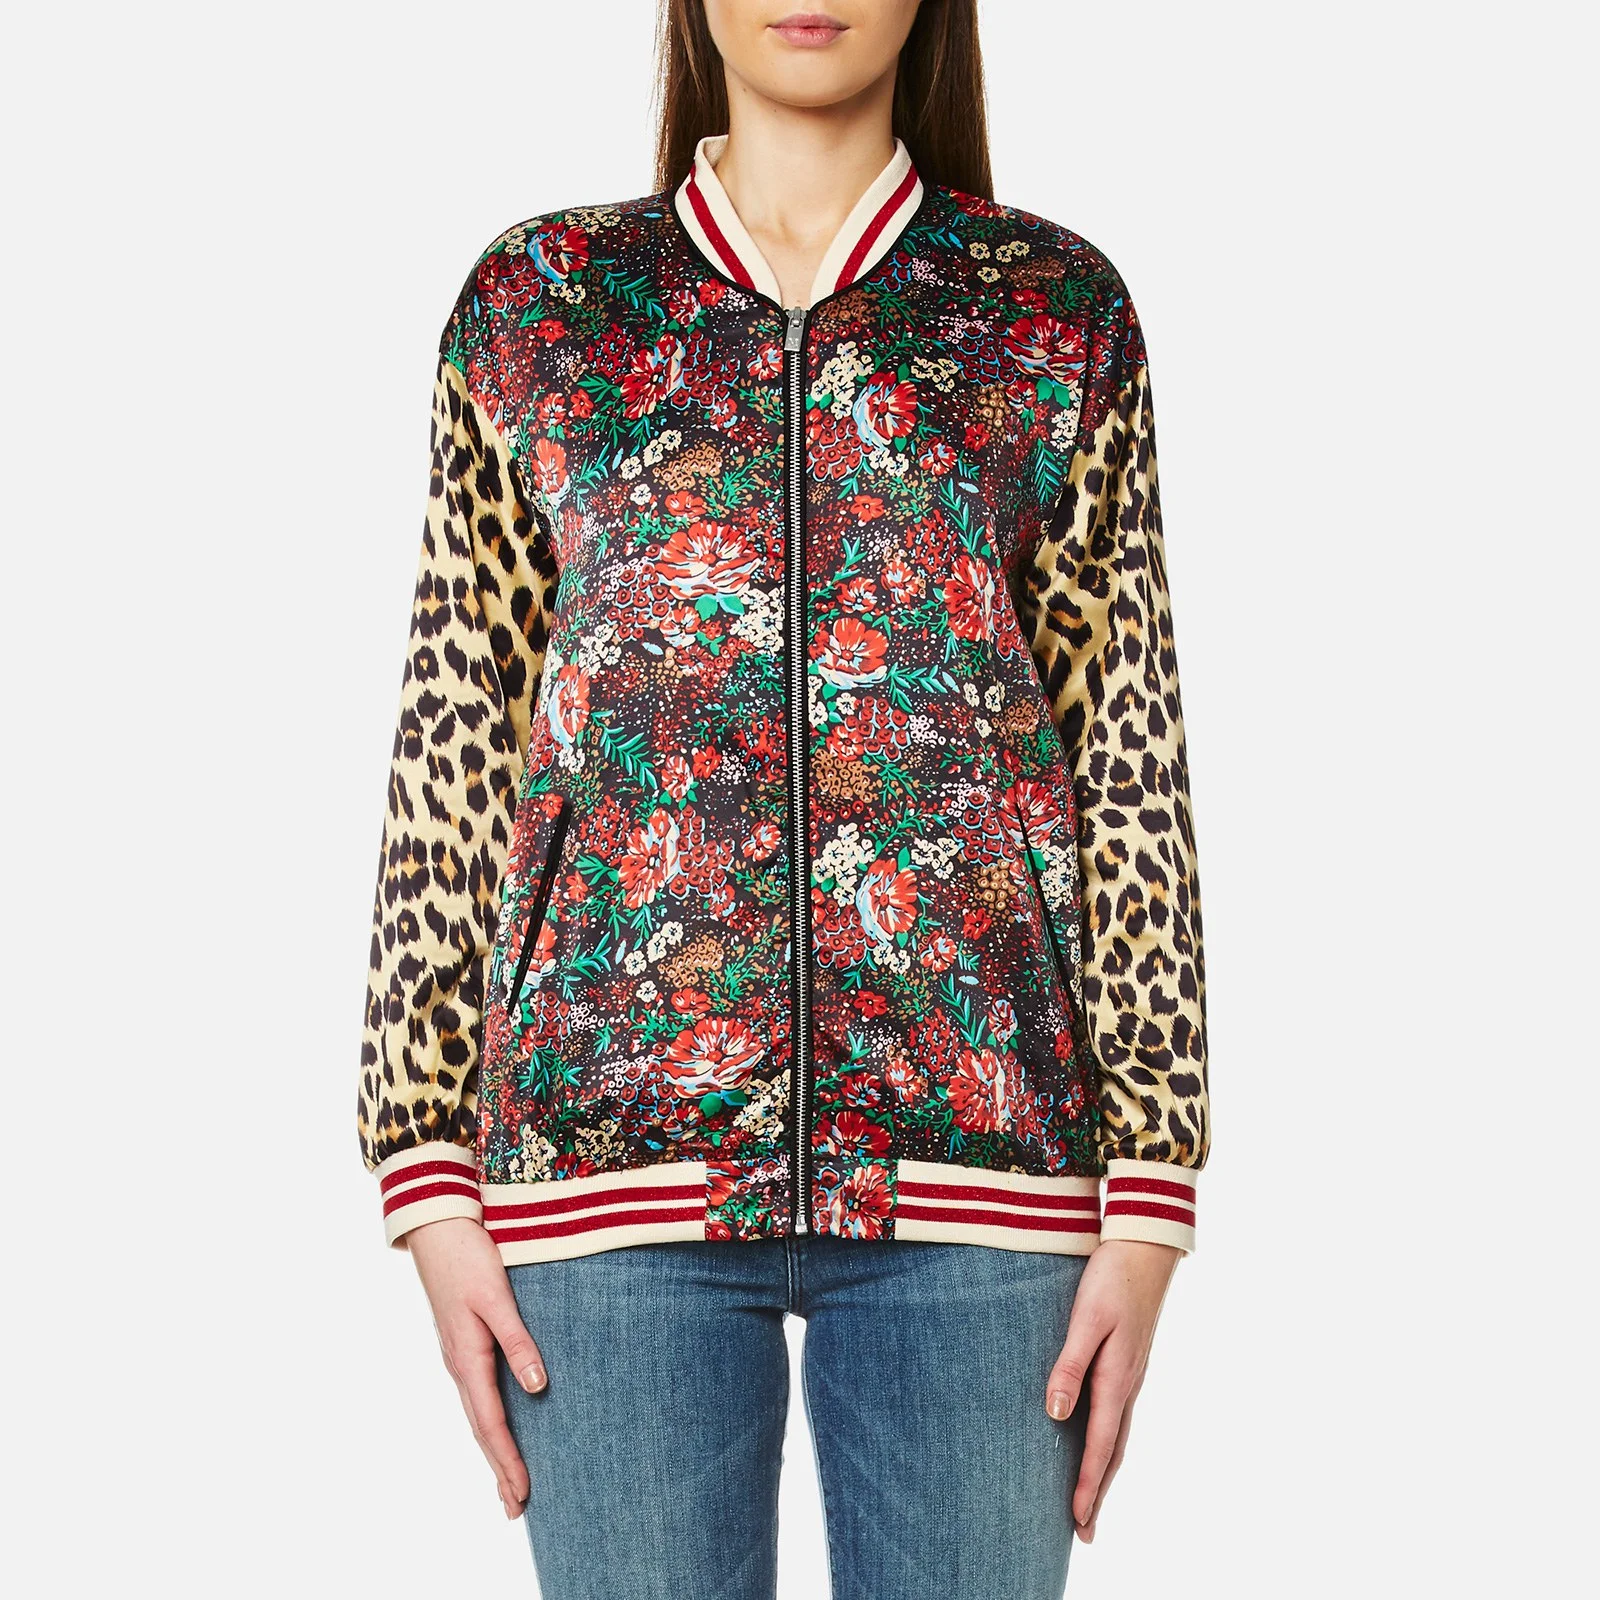 Maison Scotch Women's Silky Feel Print Mixed Bomber Jacket with Lurex Ribs - Multi Image 1